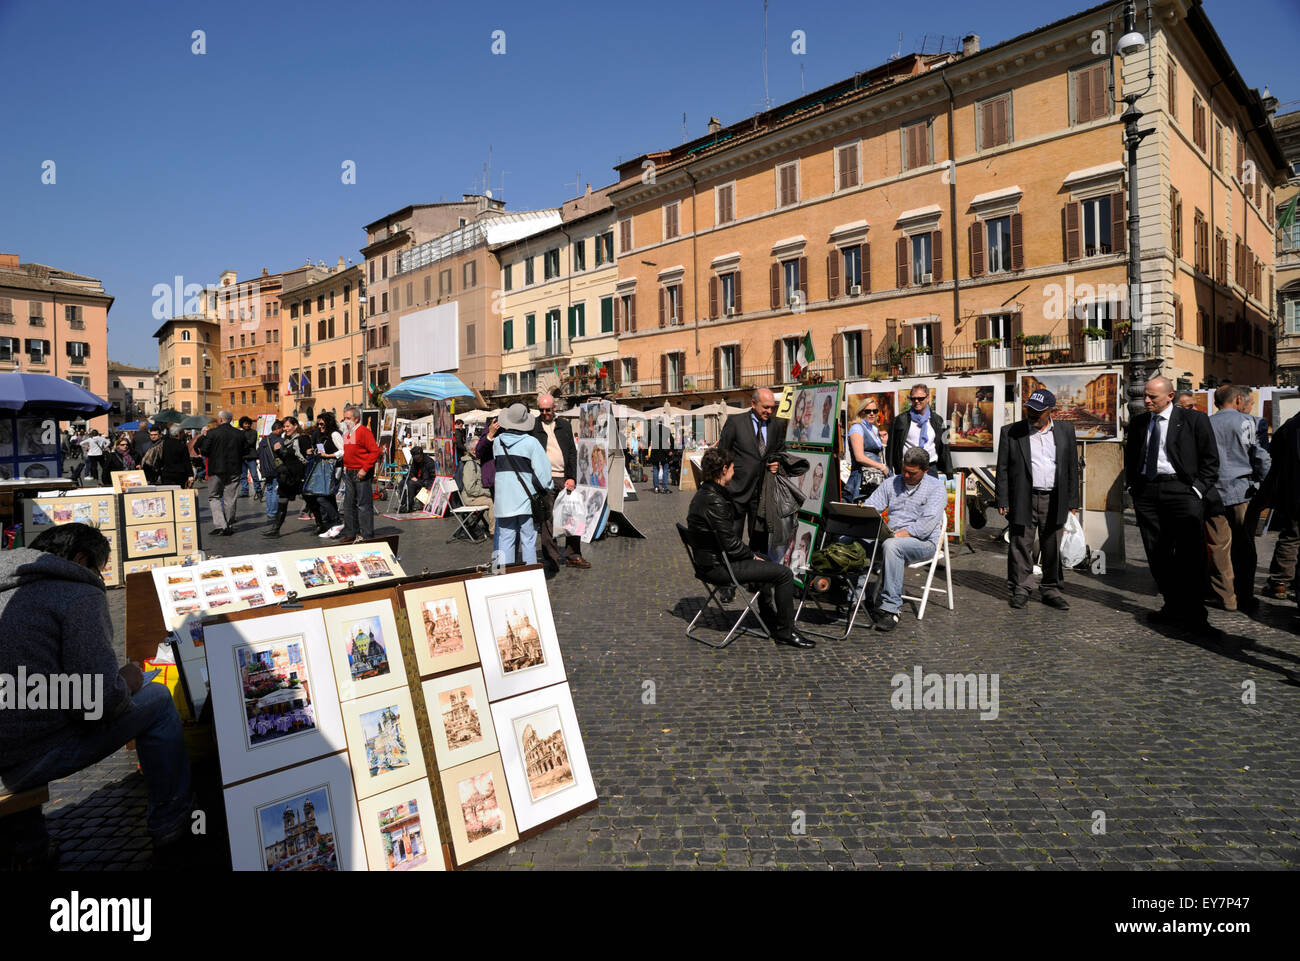 Italy, Rome, Piazza Navona, painting sellers Stock Photo